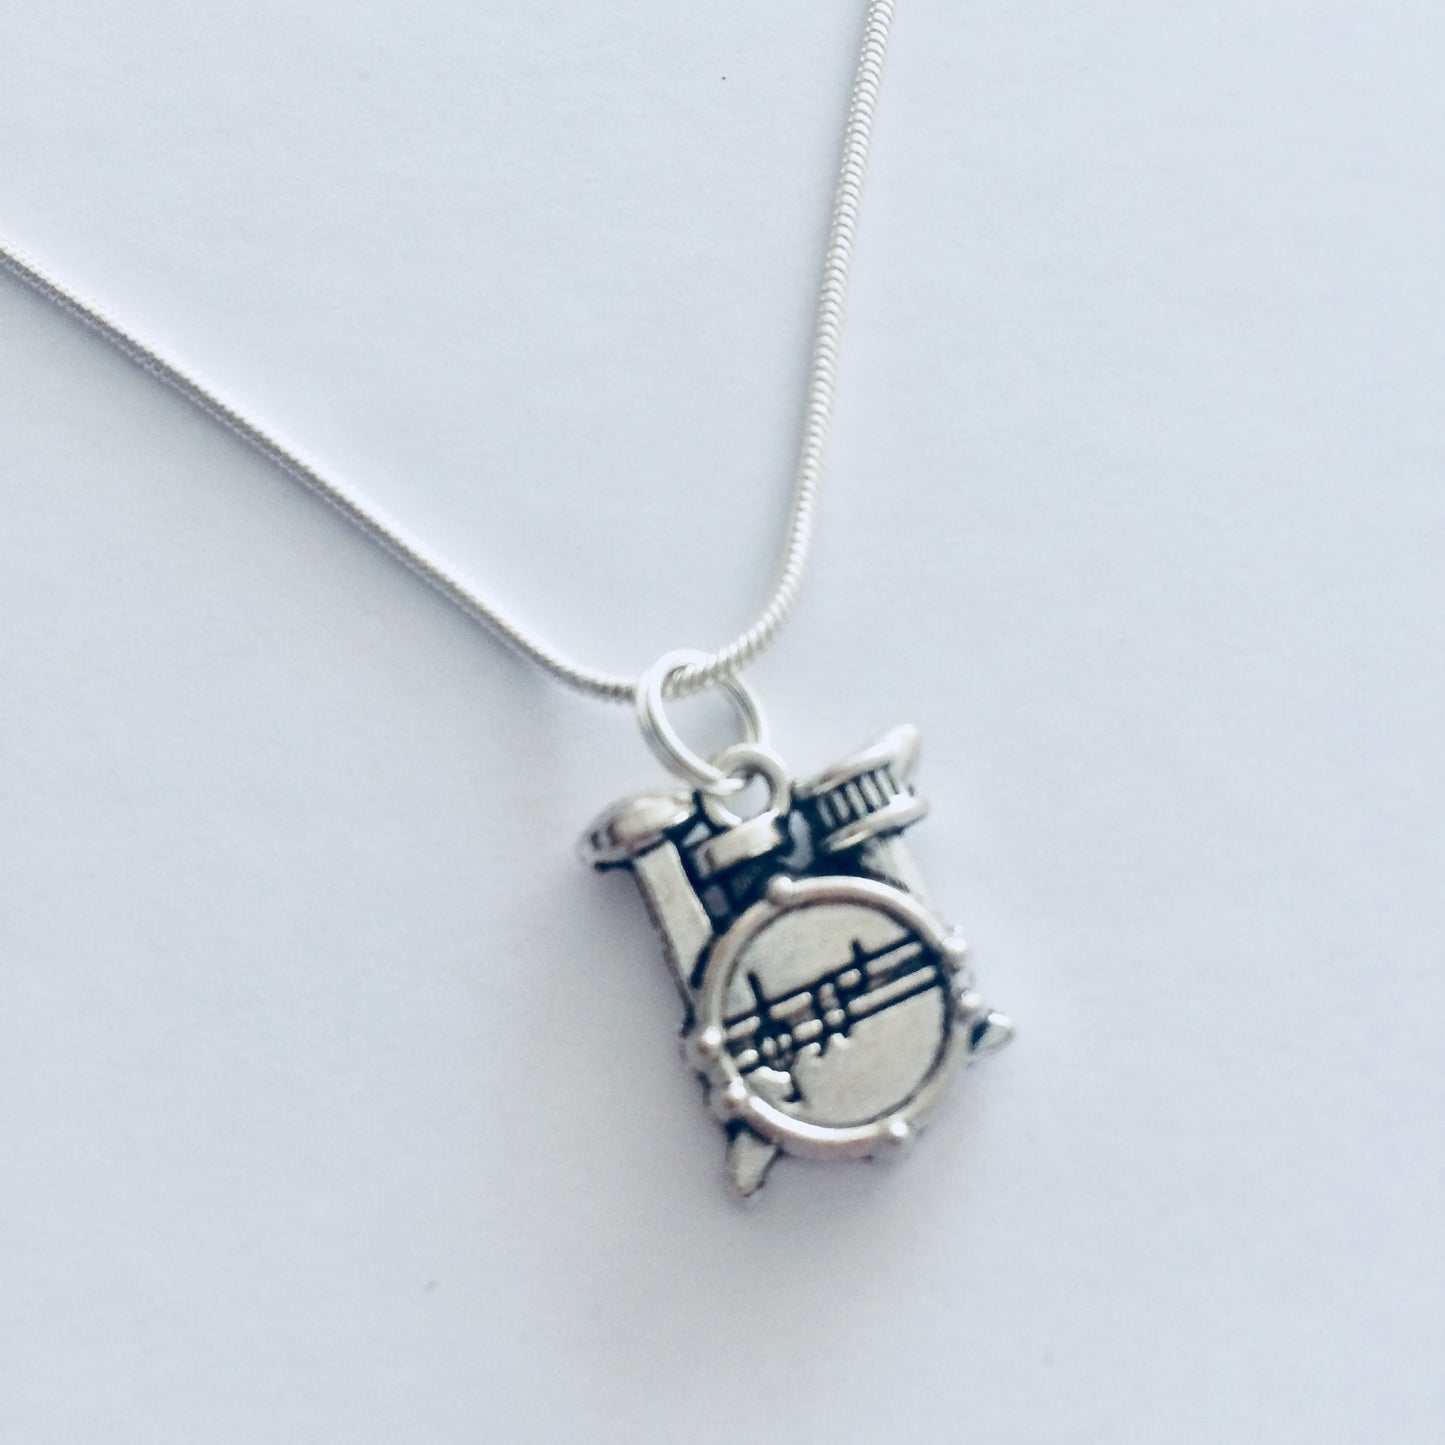 Drum Necklace, Drum Set Jewellery, Drums Jewelry, Drummer Necklace, Drummer Gifts, Musician Necklace, Musician Gift Ideas, Drum Kit Gifts.